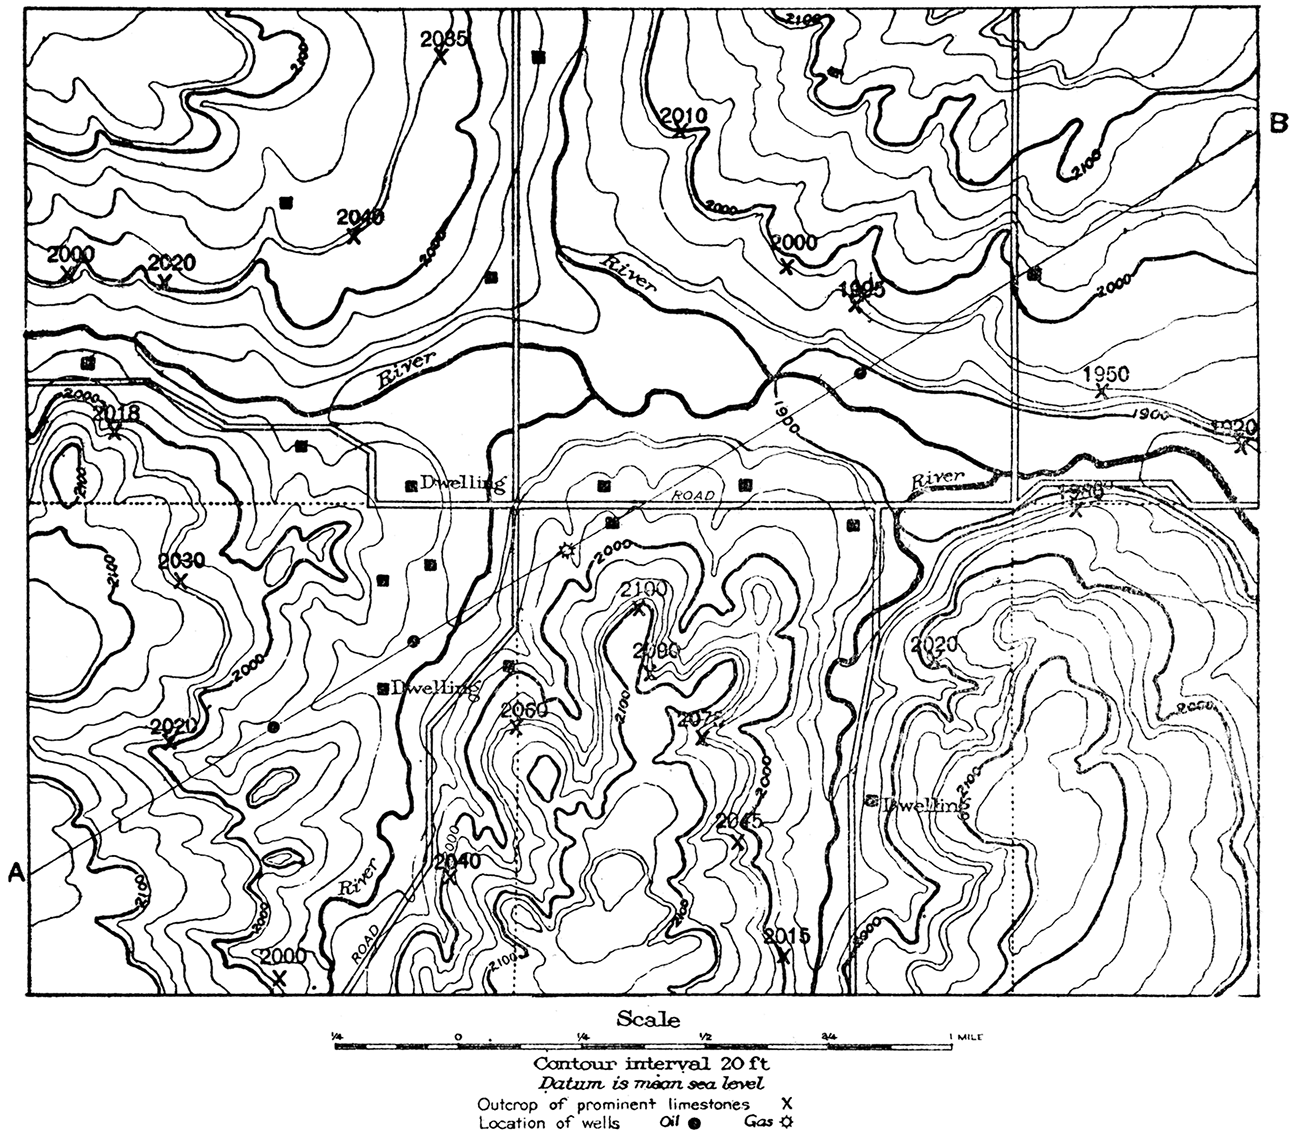 Topographic map of a small area, showing the position and elevation of outcrops of a prominent limestone bed.